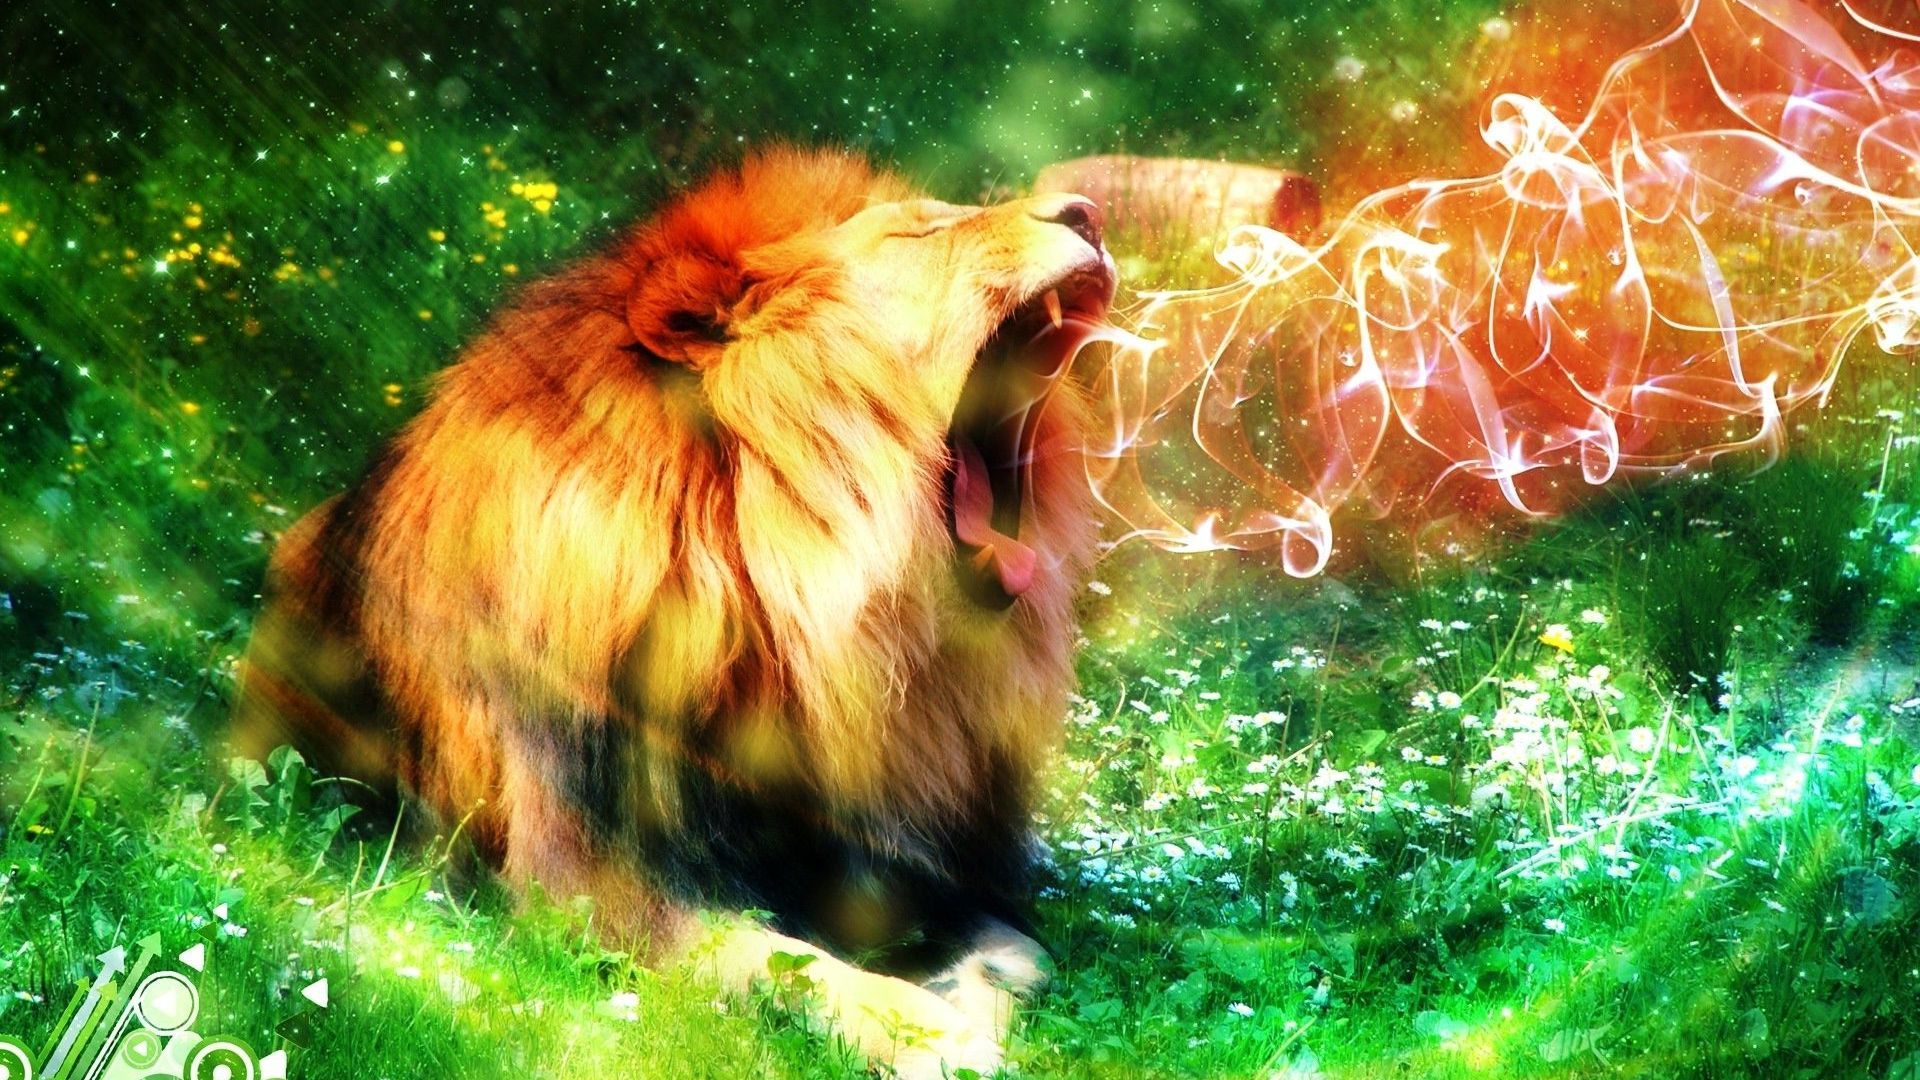 Flame from the lion's mouth Wallpaper 27121